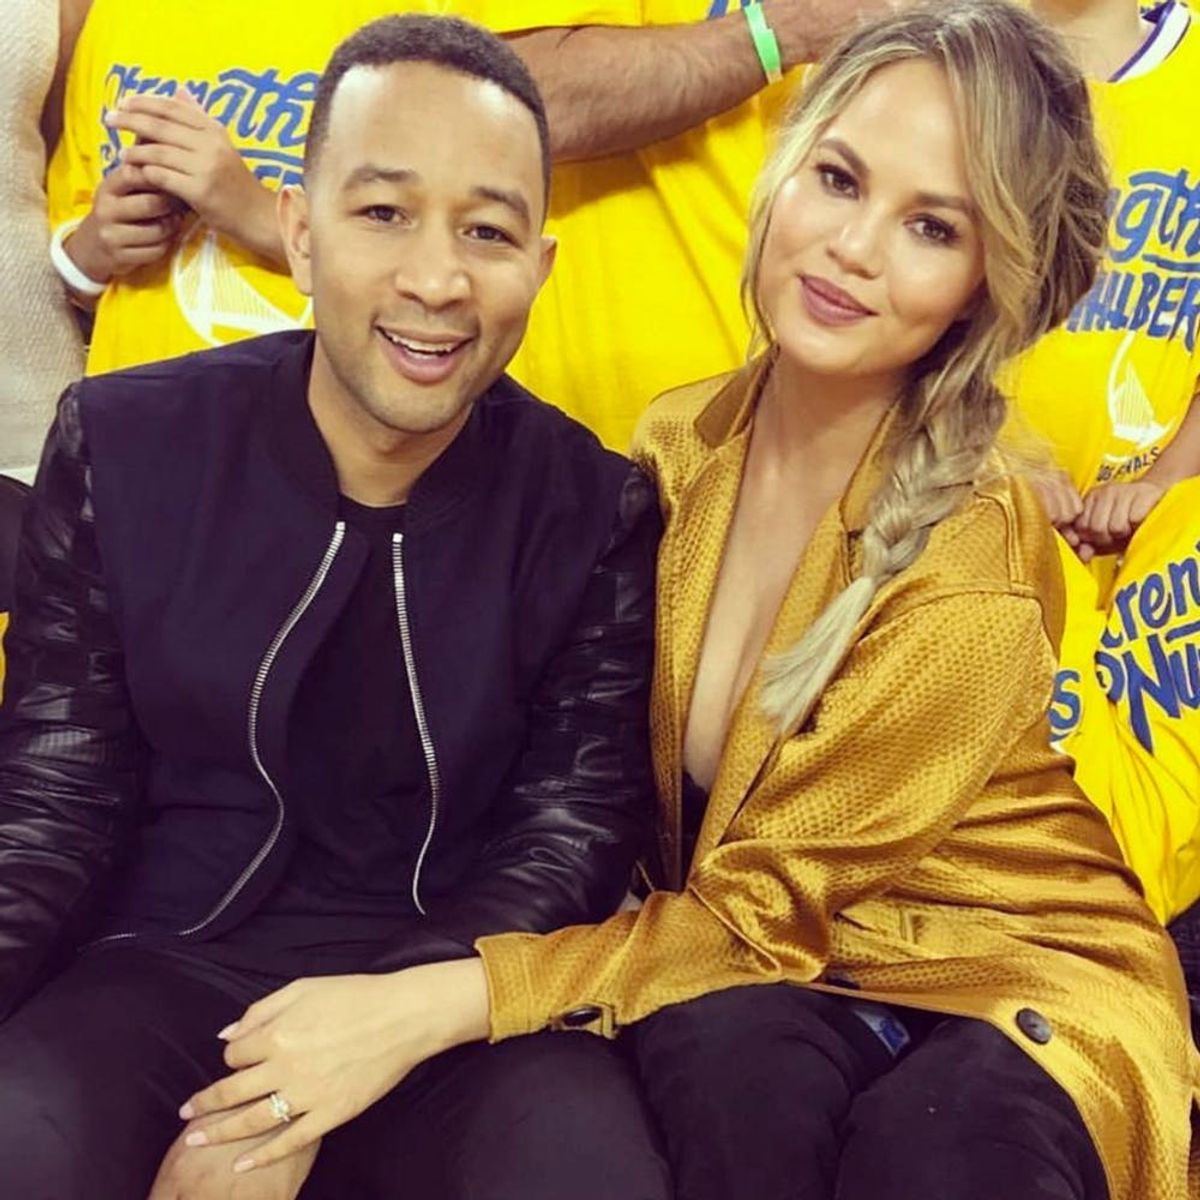 Chrissy Teigen Pulled Off the Most Hilarious Baby Prank at Last Night’s NBA Game